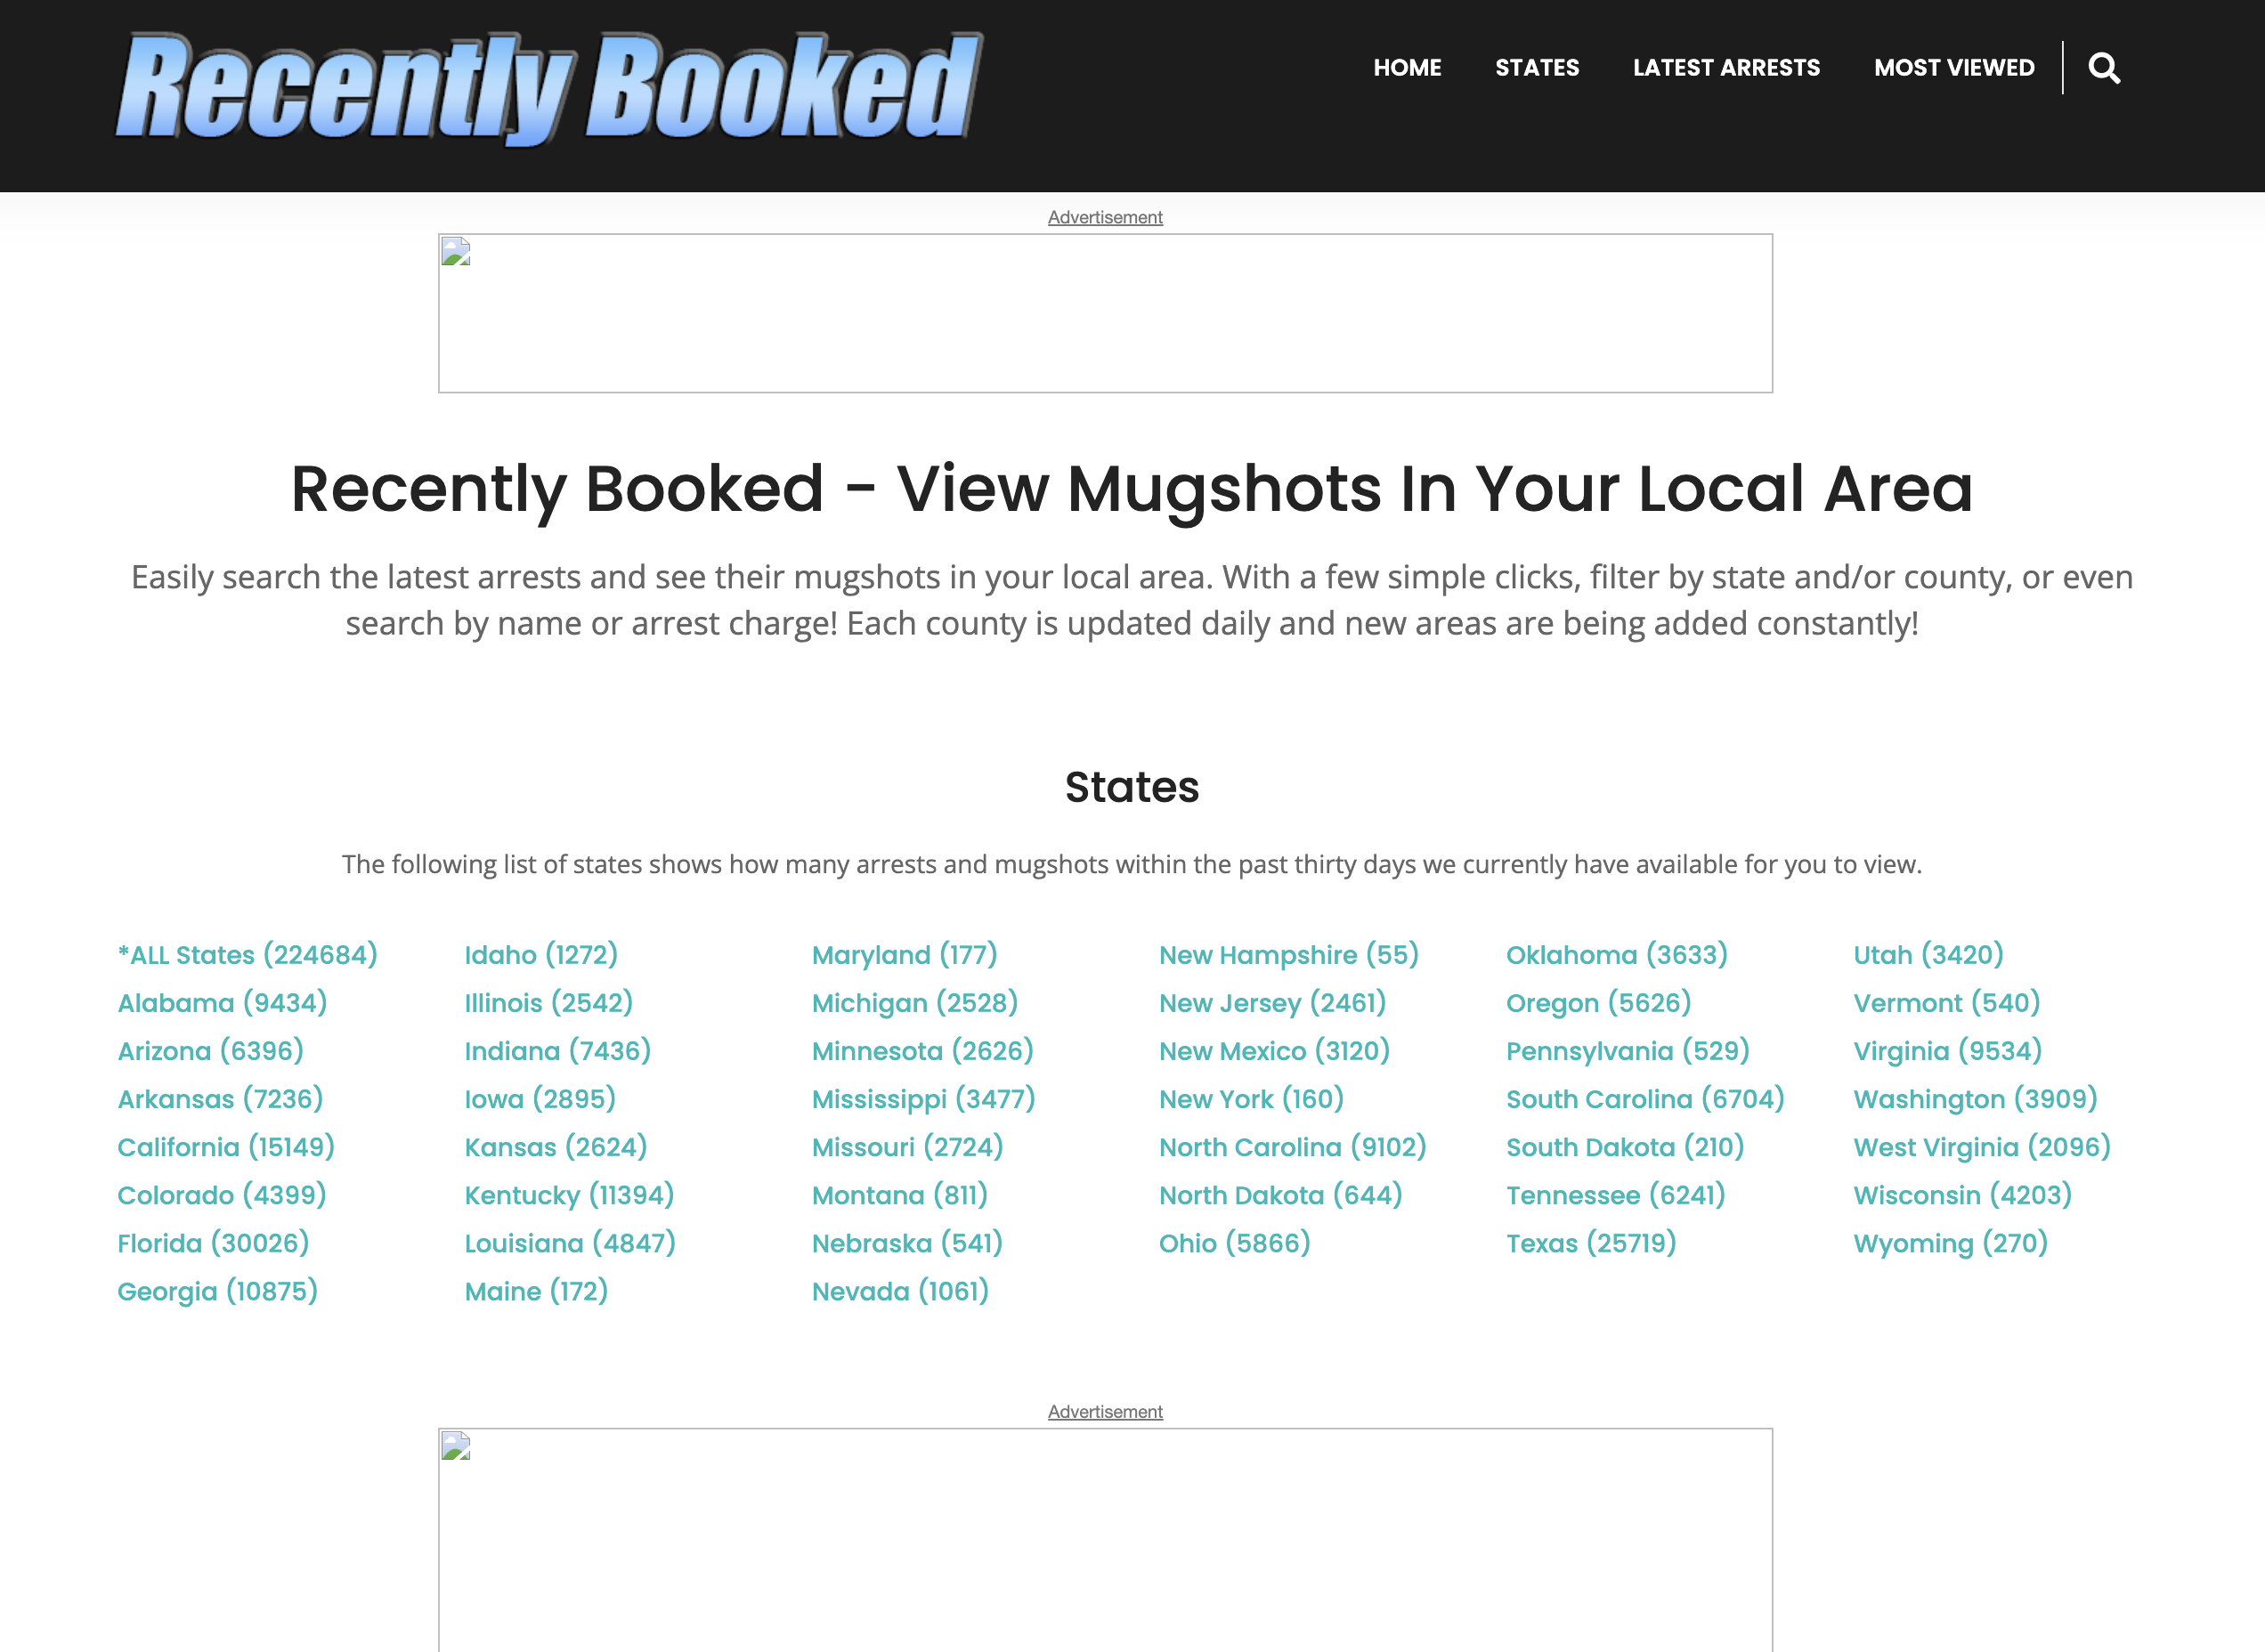 Recently Booked Removal - How to remove mugshot records from RecentlyBooked.com